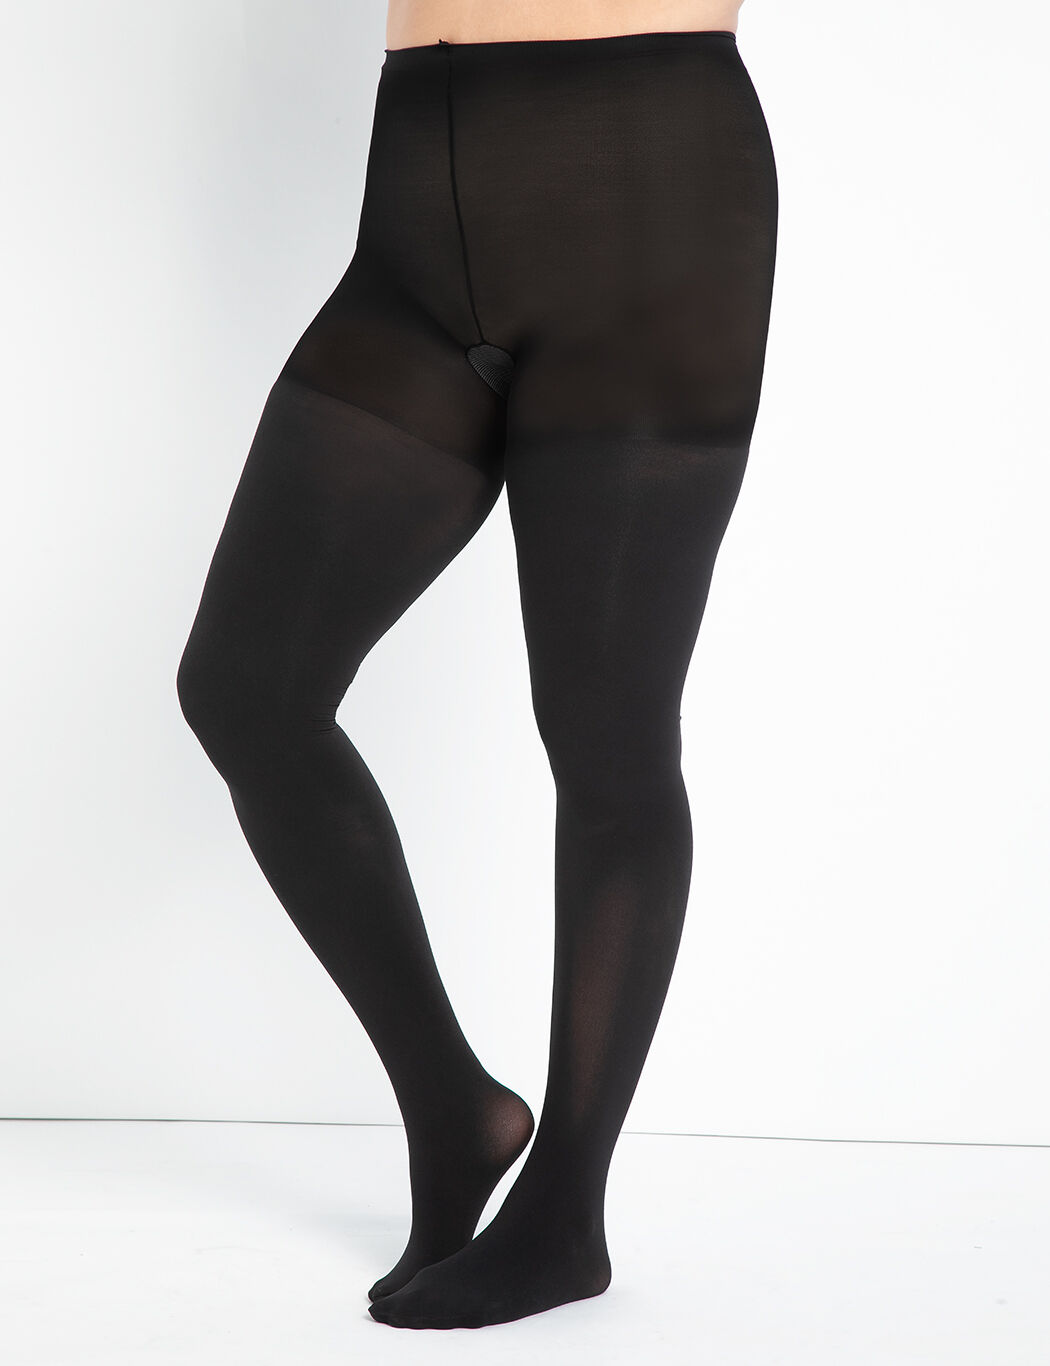 Women Premium Opaque Tights By ( Size 14/16 )